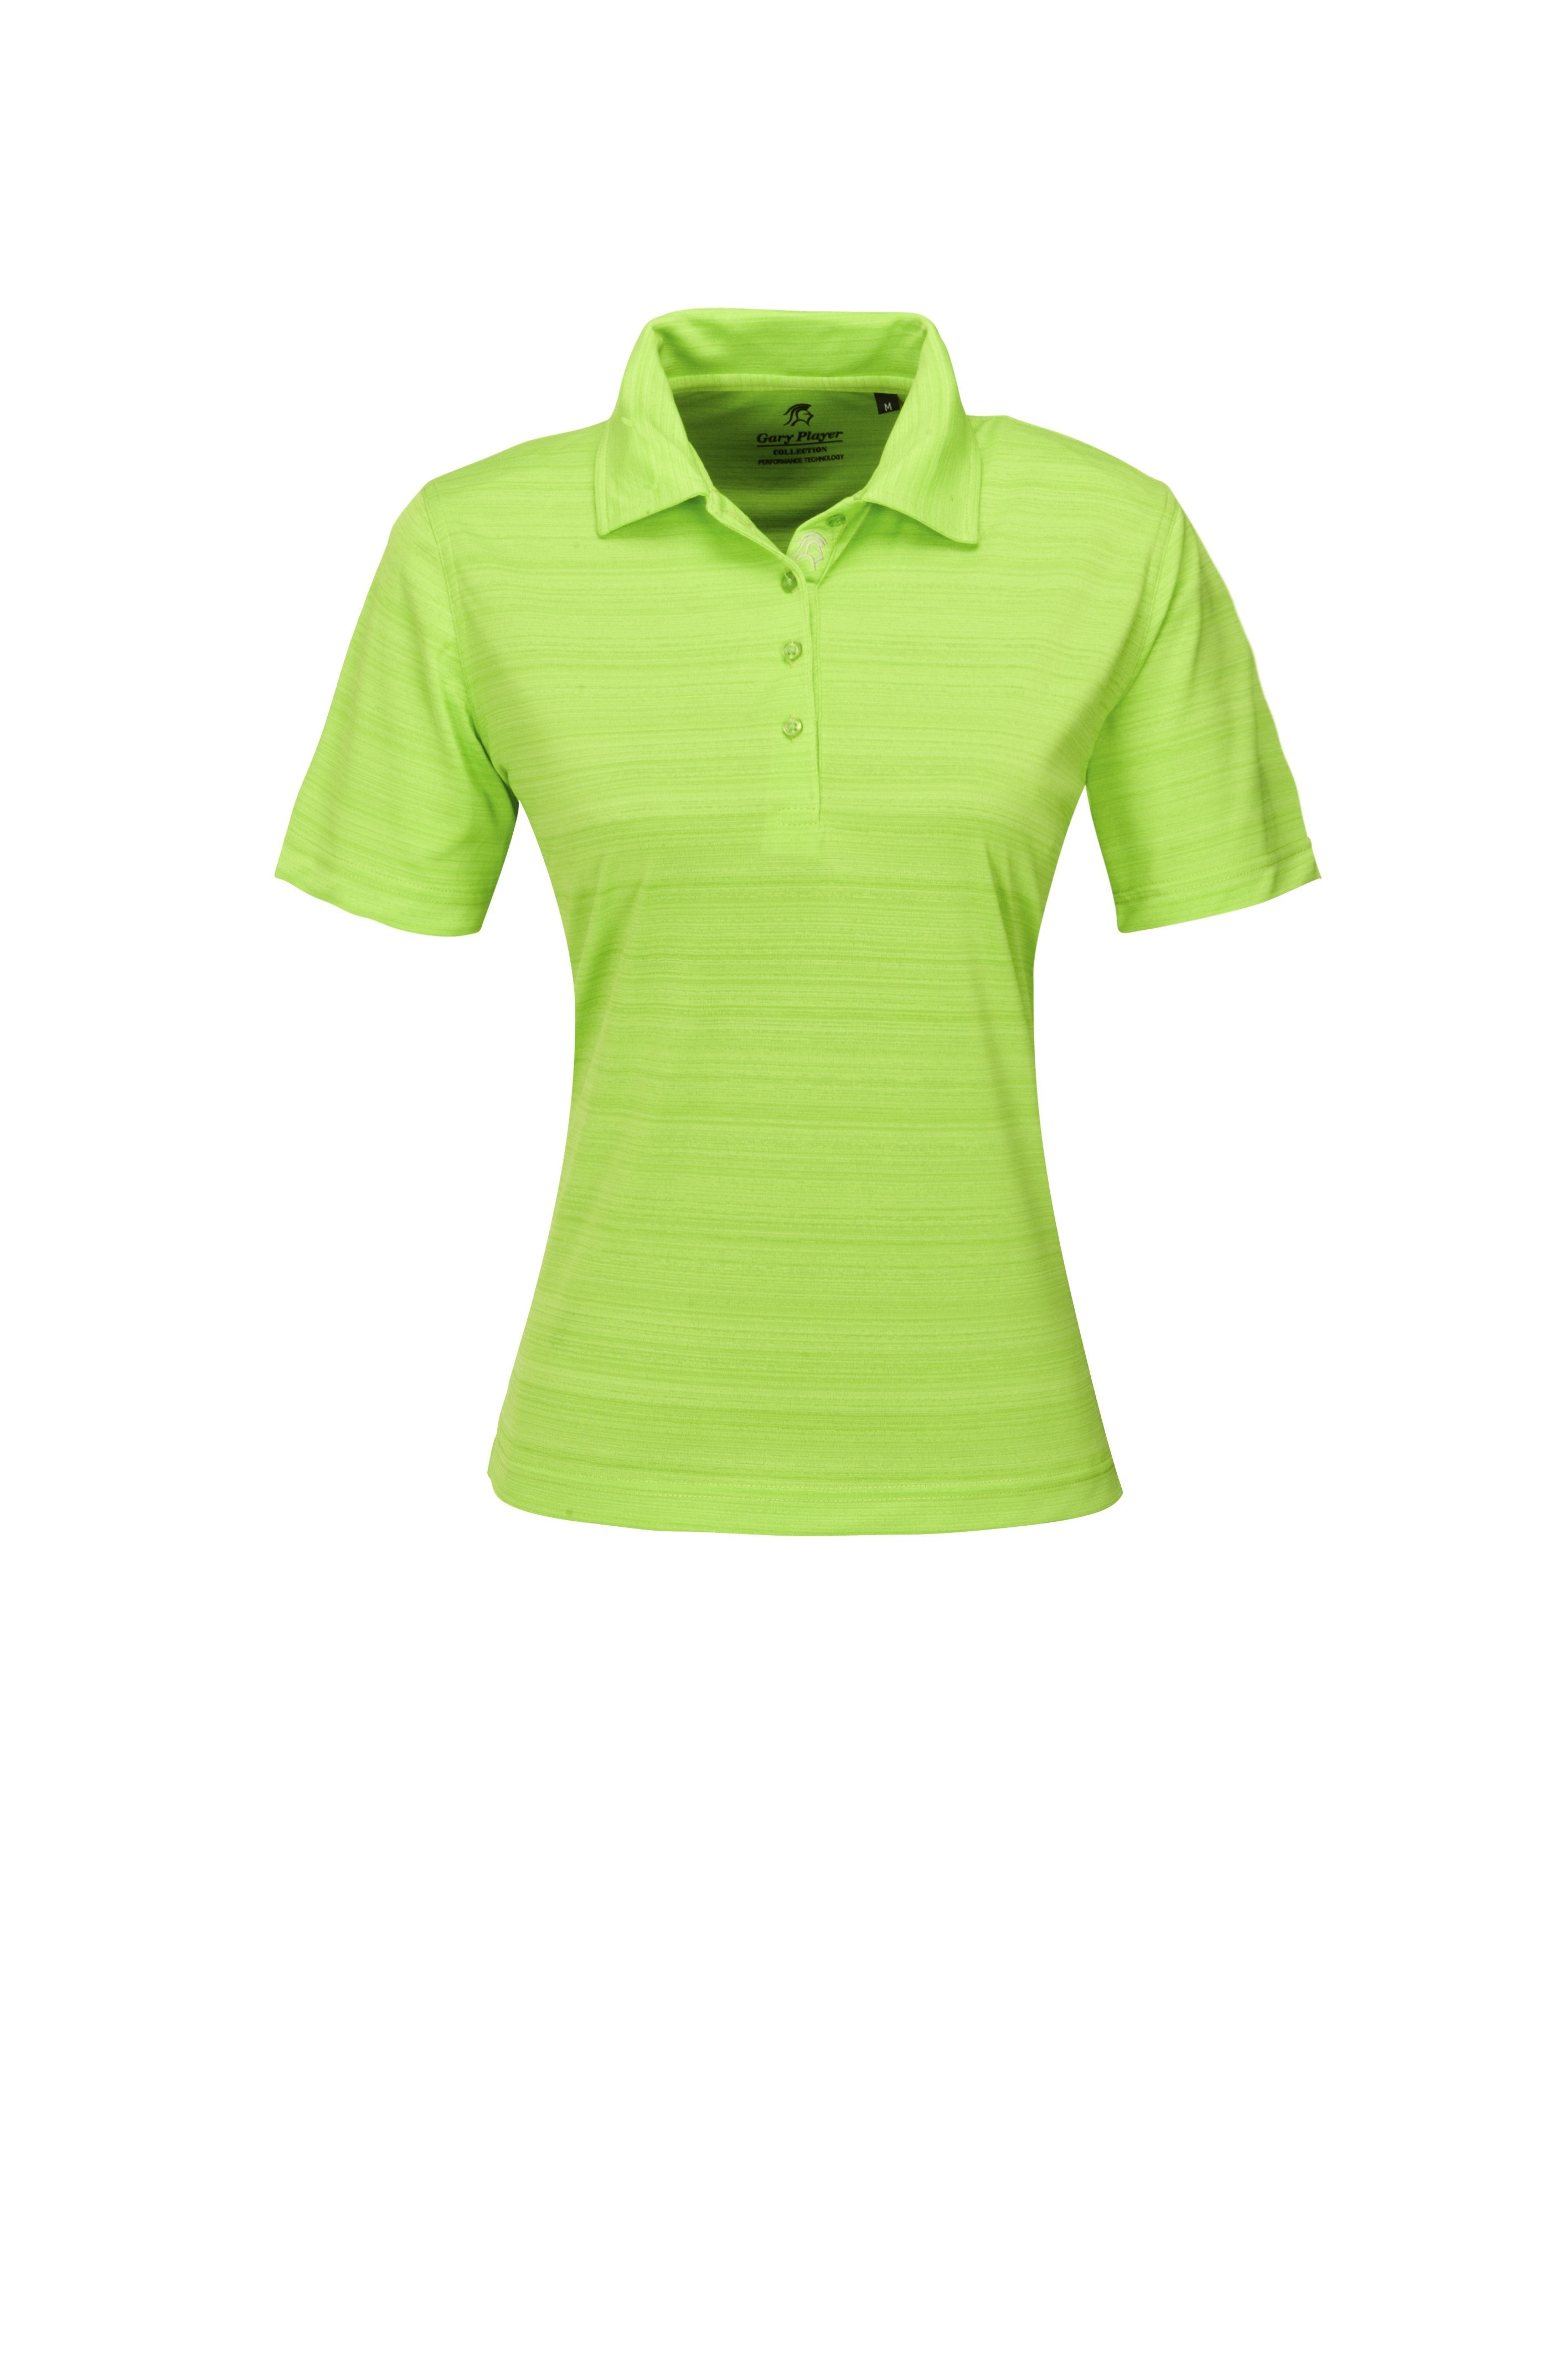 Ladies Astoria Golf Shirt - Lime Only-L-Lime-L